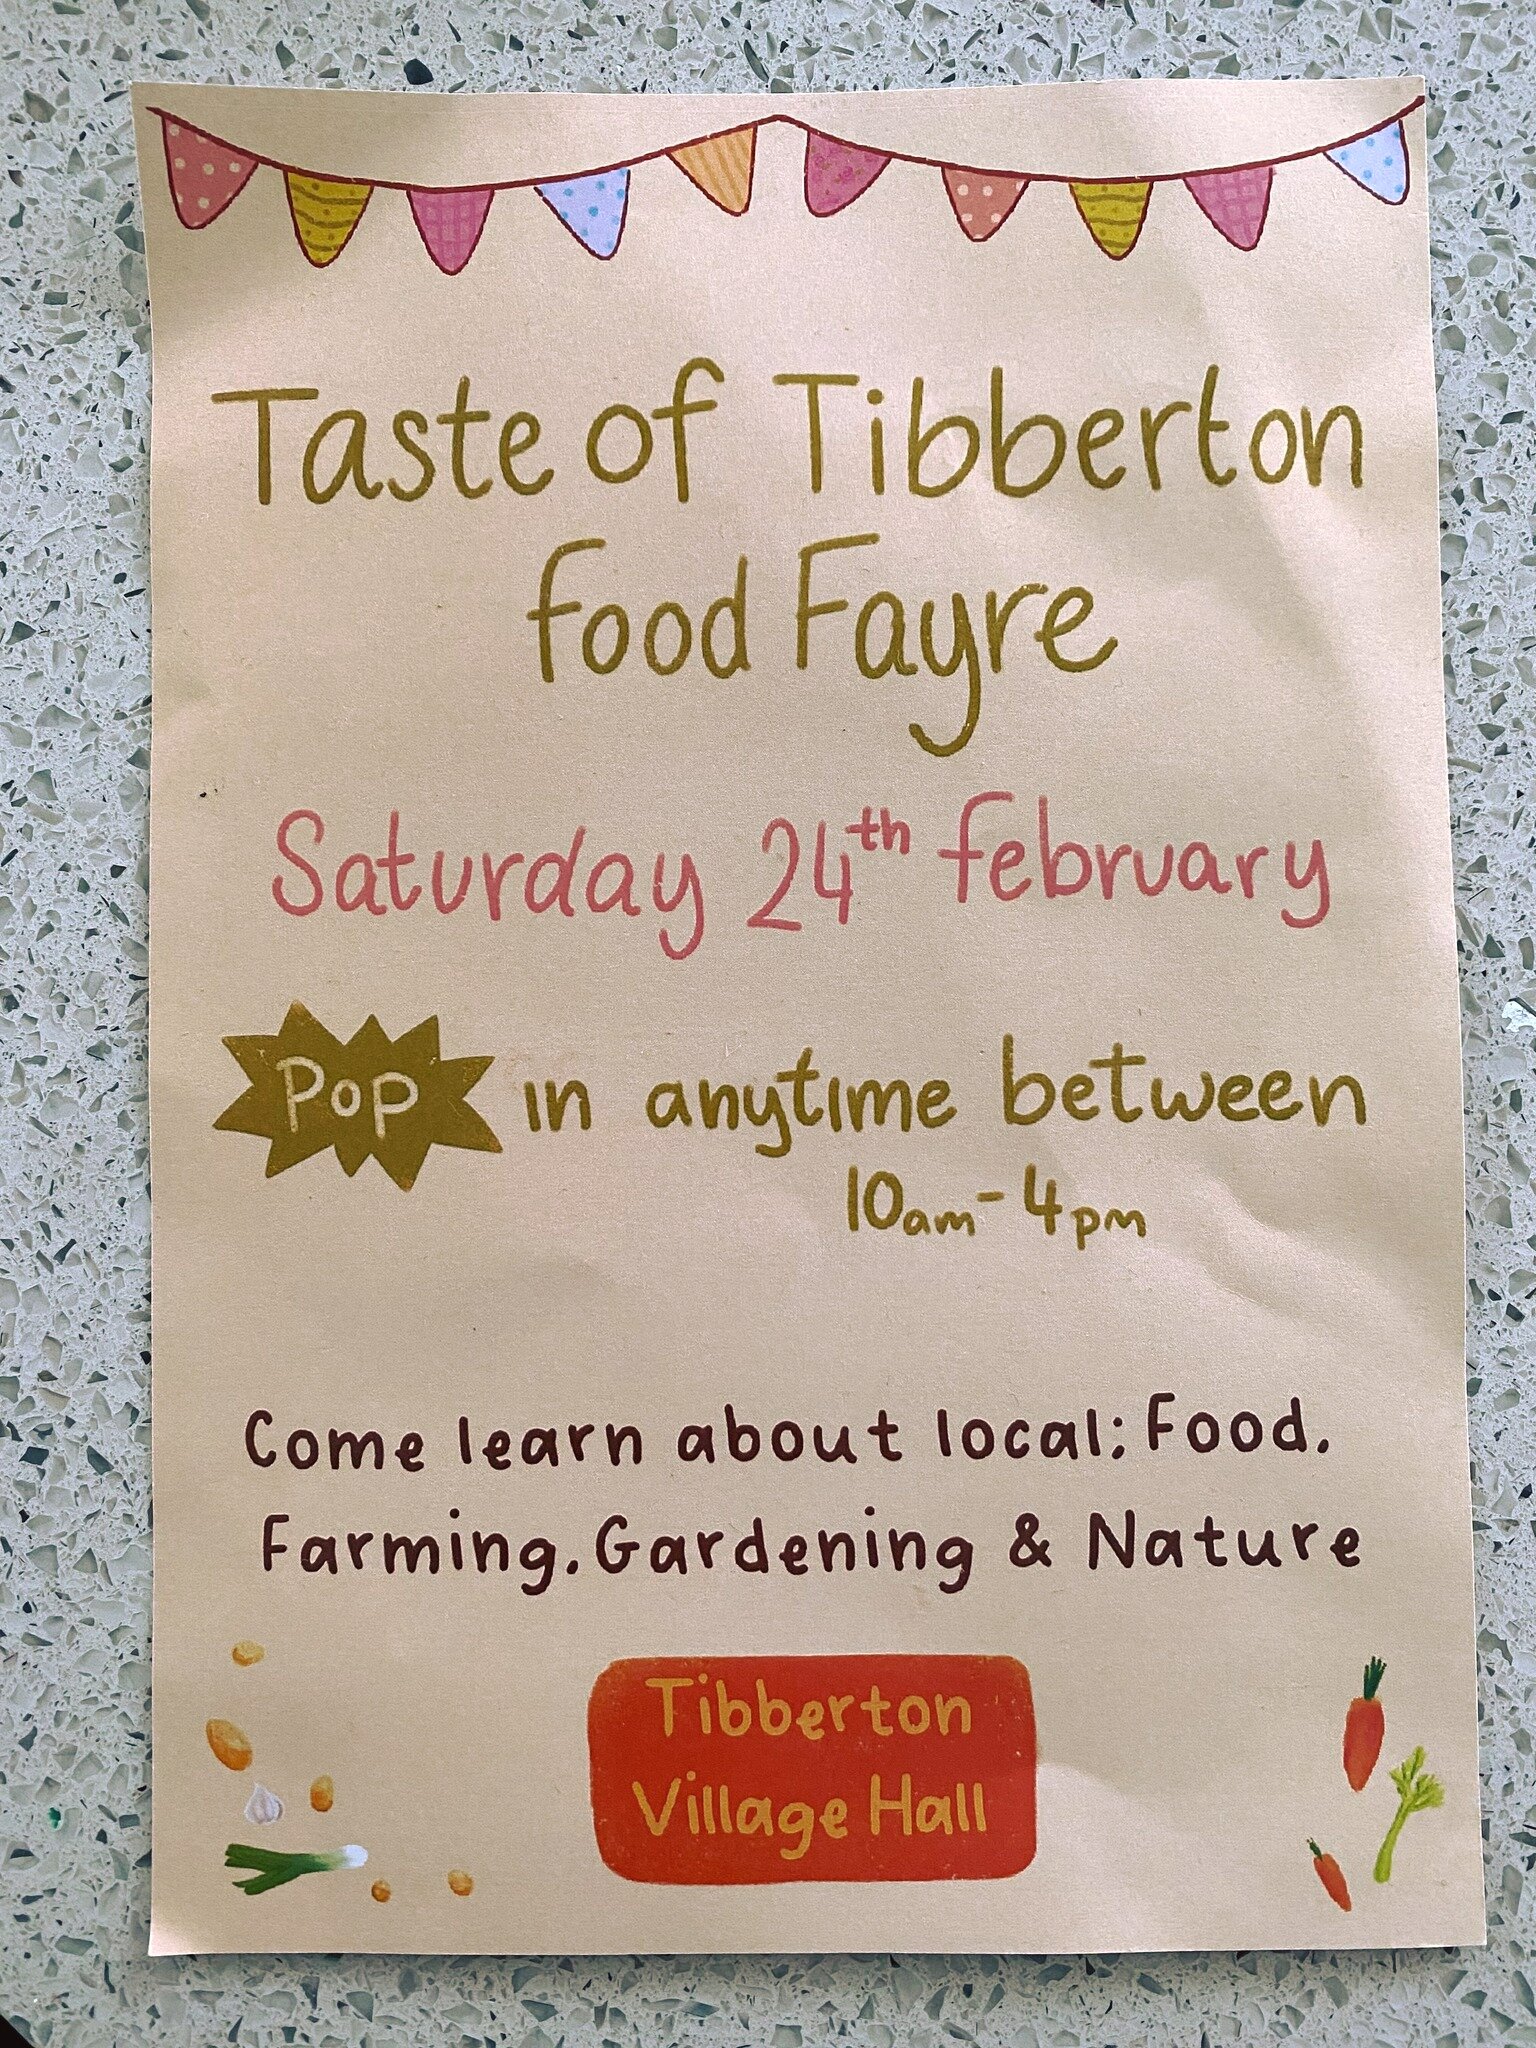 Come along to the exciting Taste of Tibberton Food Fayre this weekend...